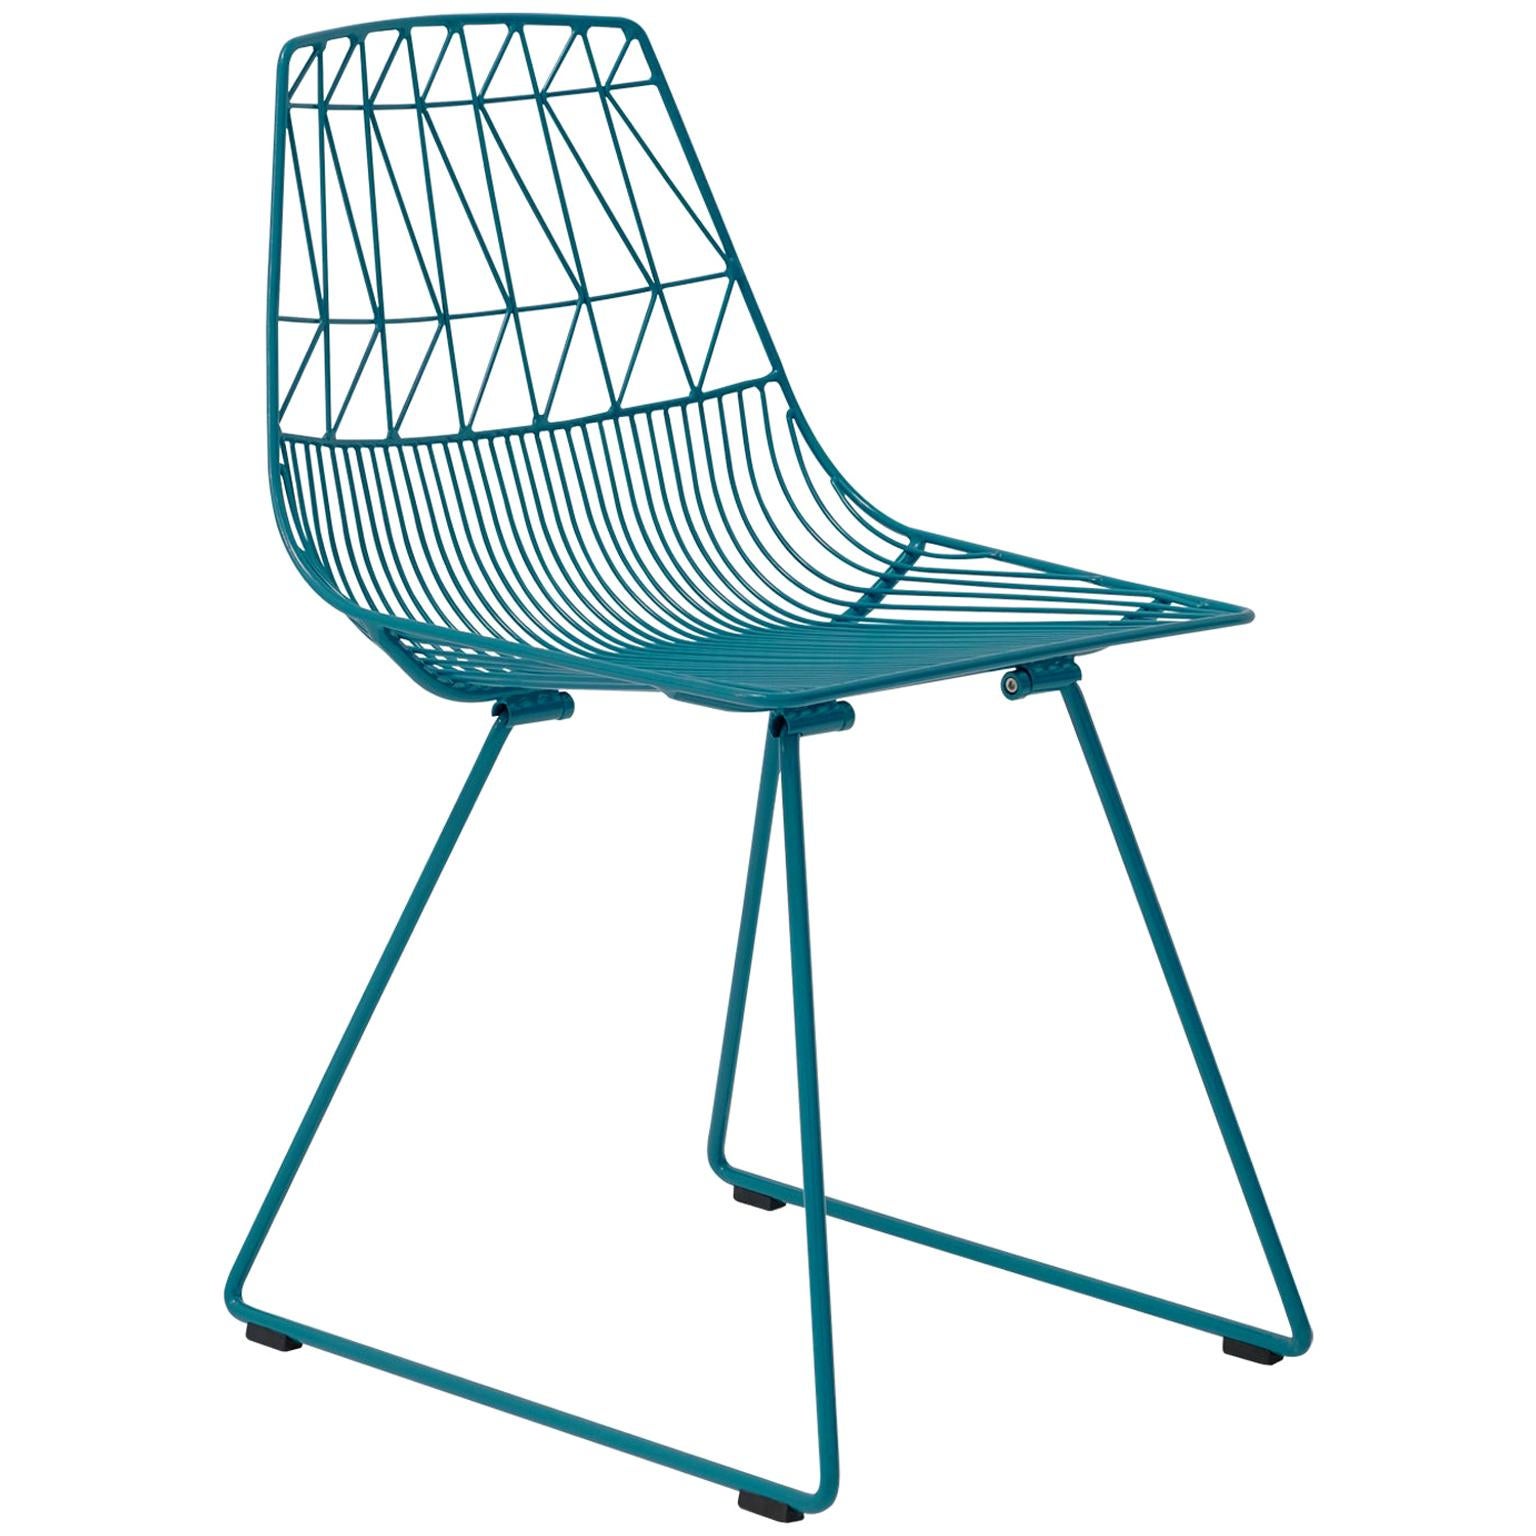 Mid-Century Modern, Minimalist Wire Chair, the Lucy Chair in Peacock Blue